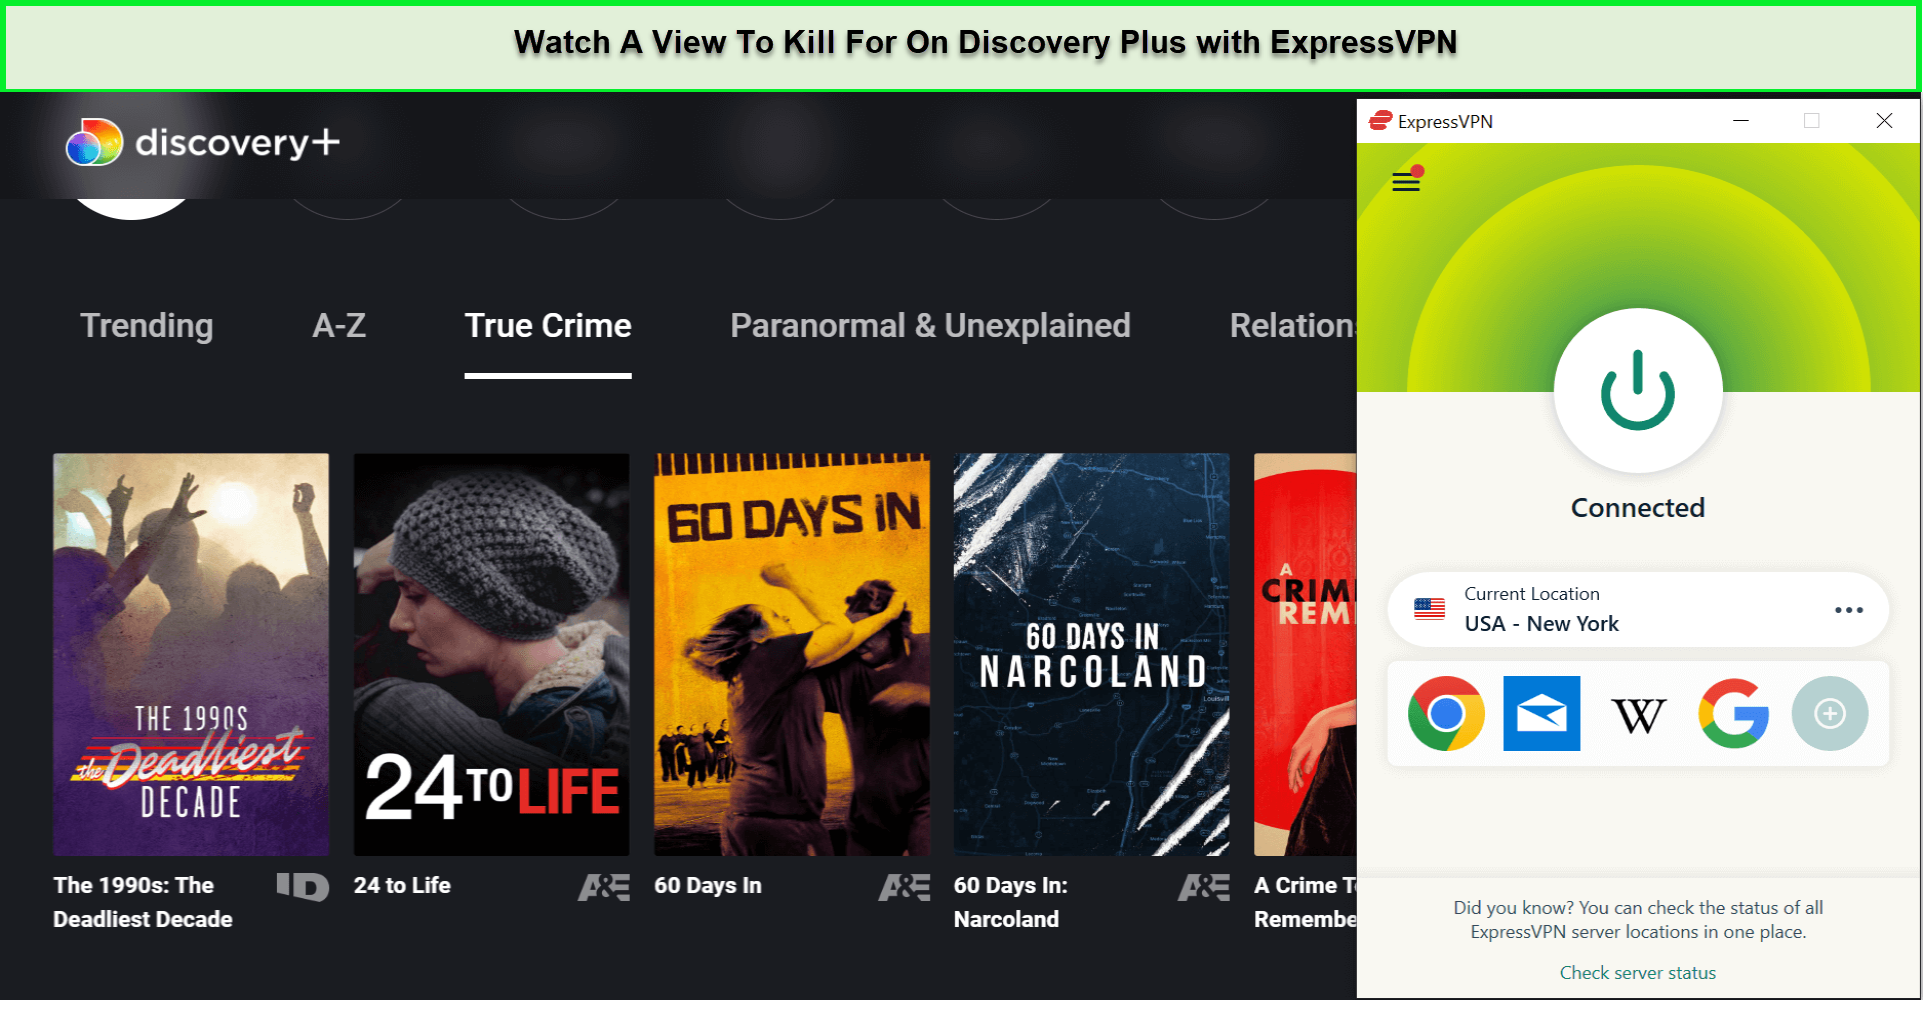 Watch-A-View-To-Kill-For-in-India-On-Discovery-Plus-with-ExpressVPN